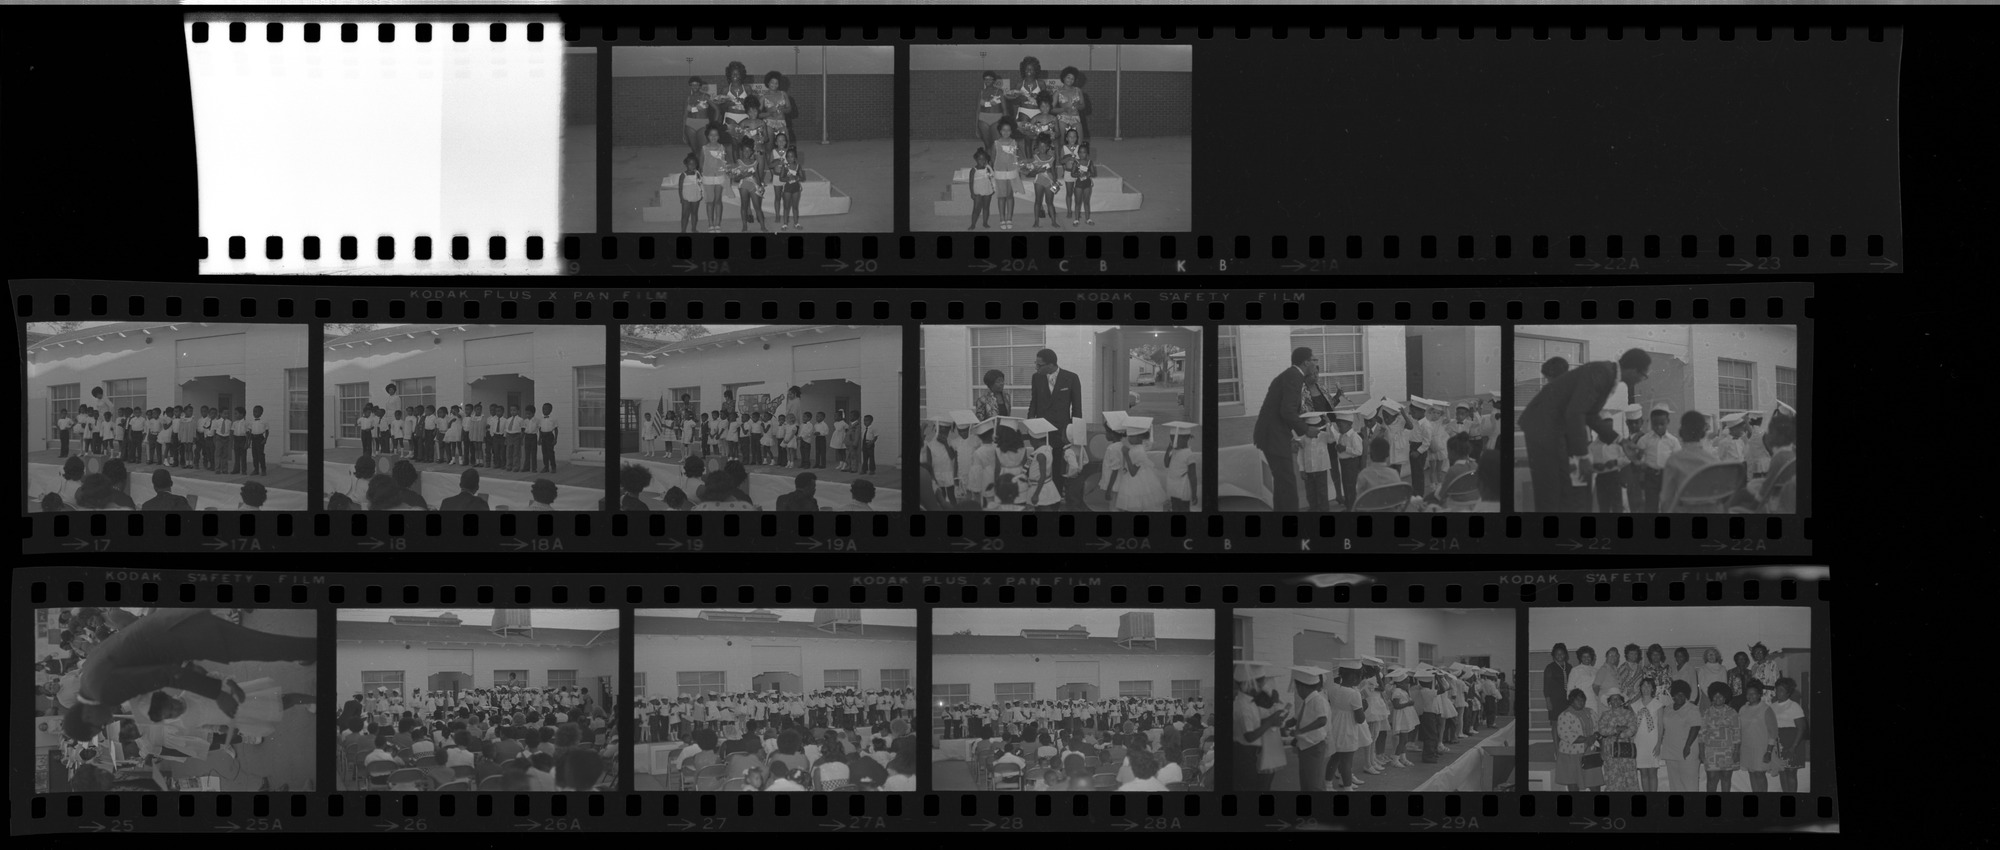 Set of negatives by Clinton Wright including Operation Independence Day Care graduation, Eloise Barnett's wedding, C.E.P. receptionist, and beauty contest at Doolittle, 1971, page 1